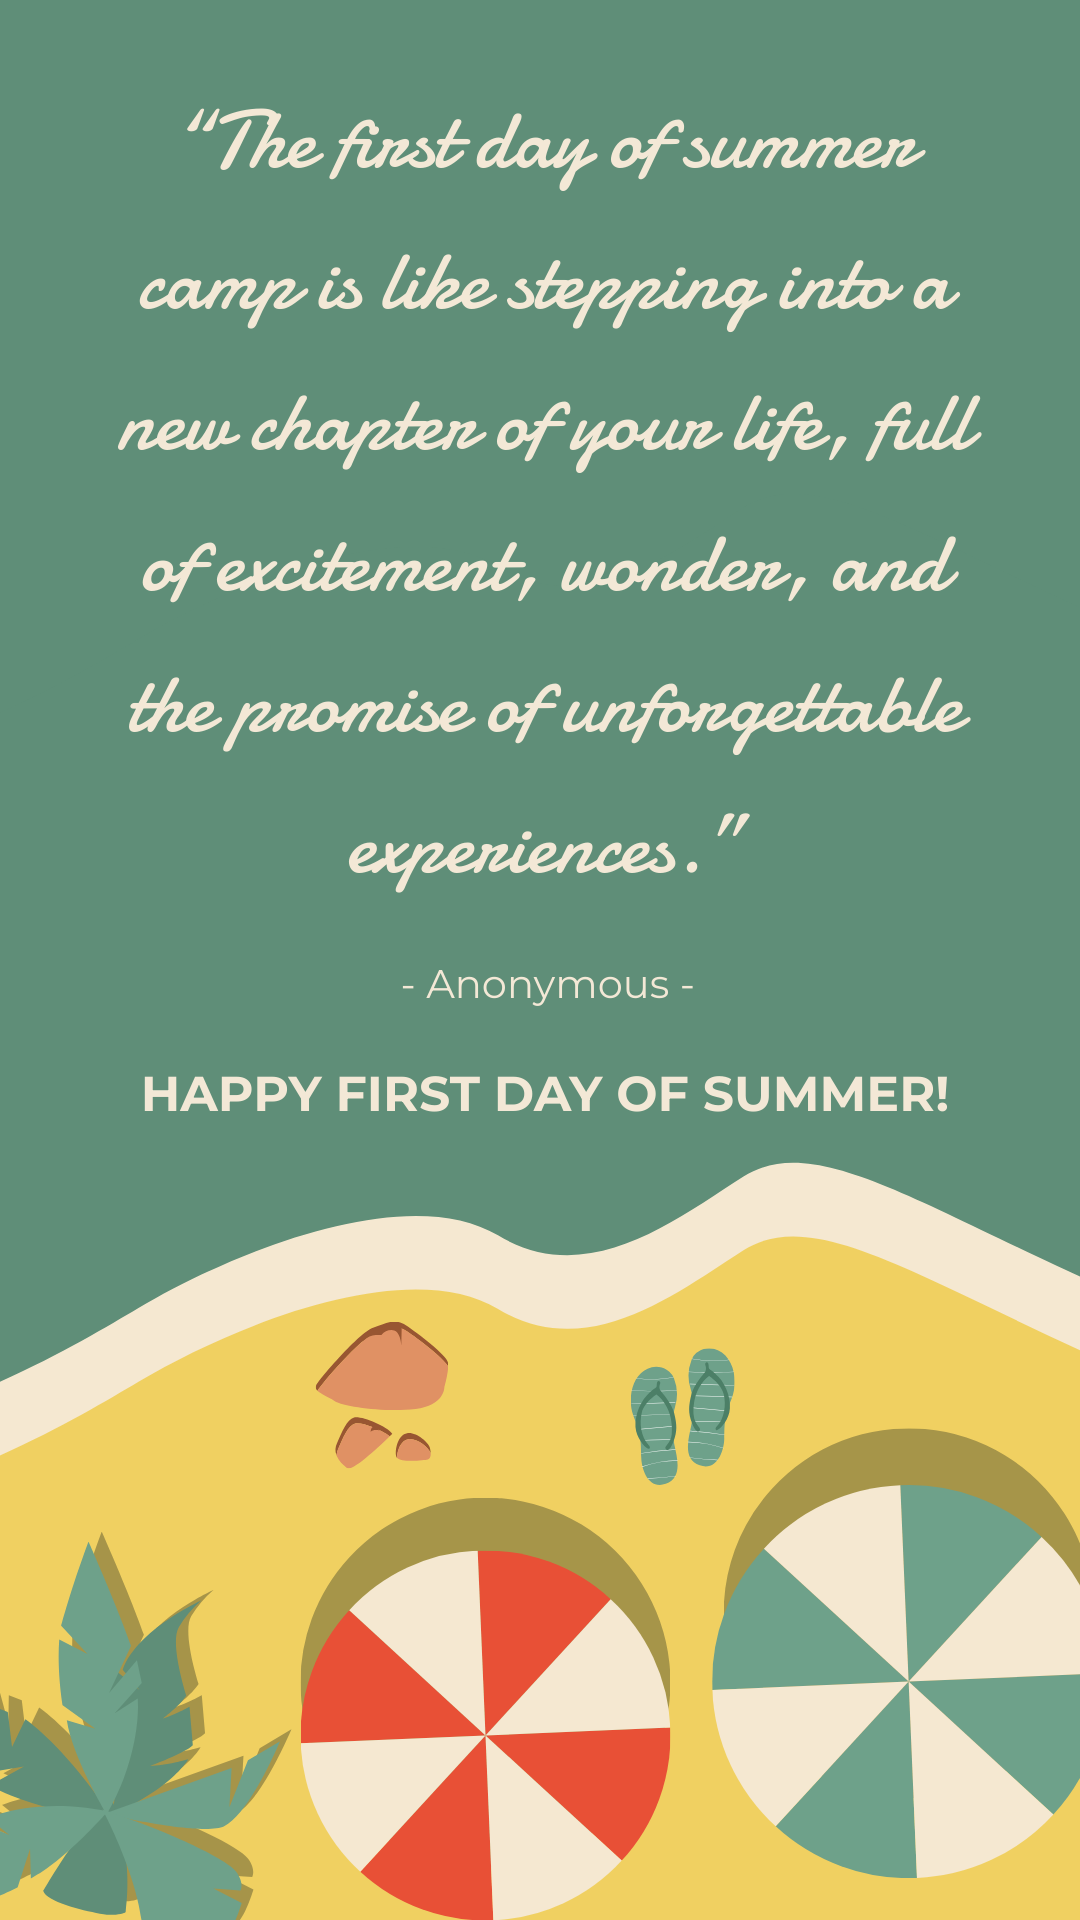 First Day of Summer Camp Quote